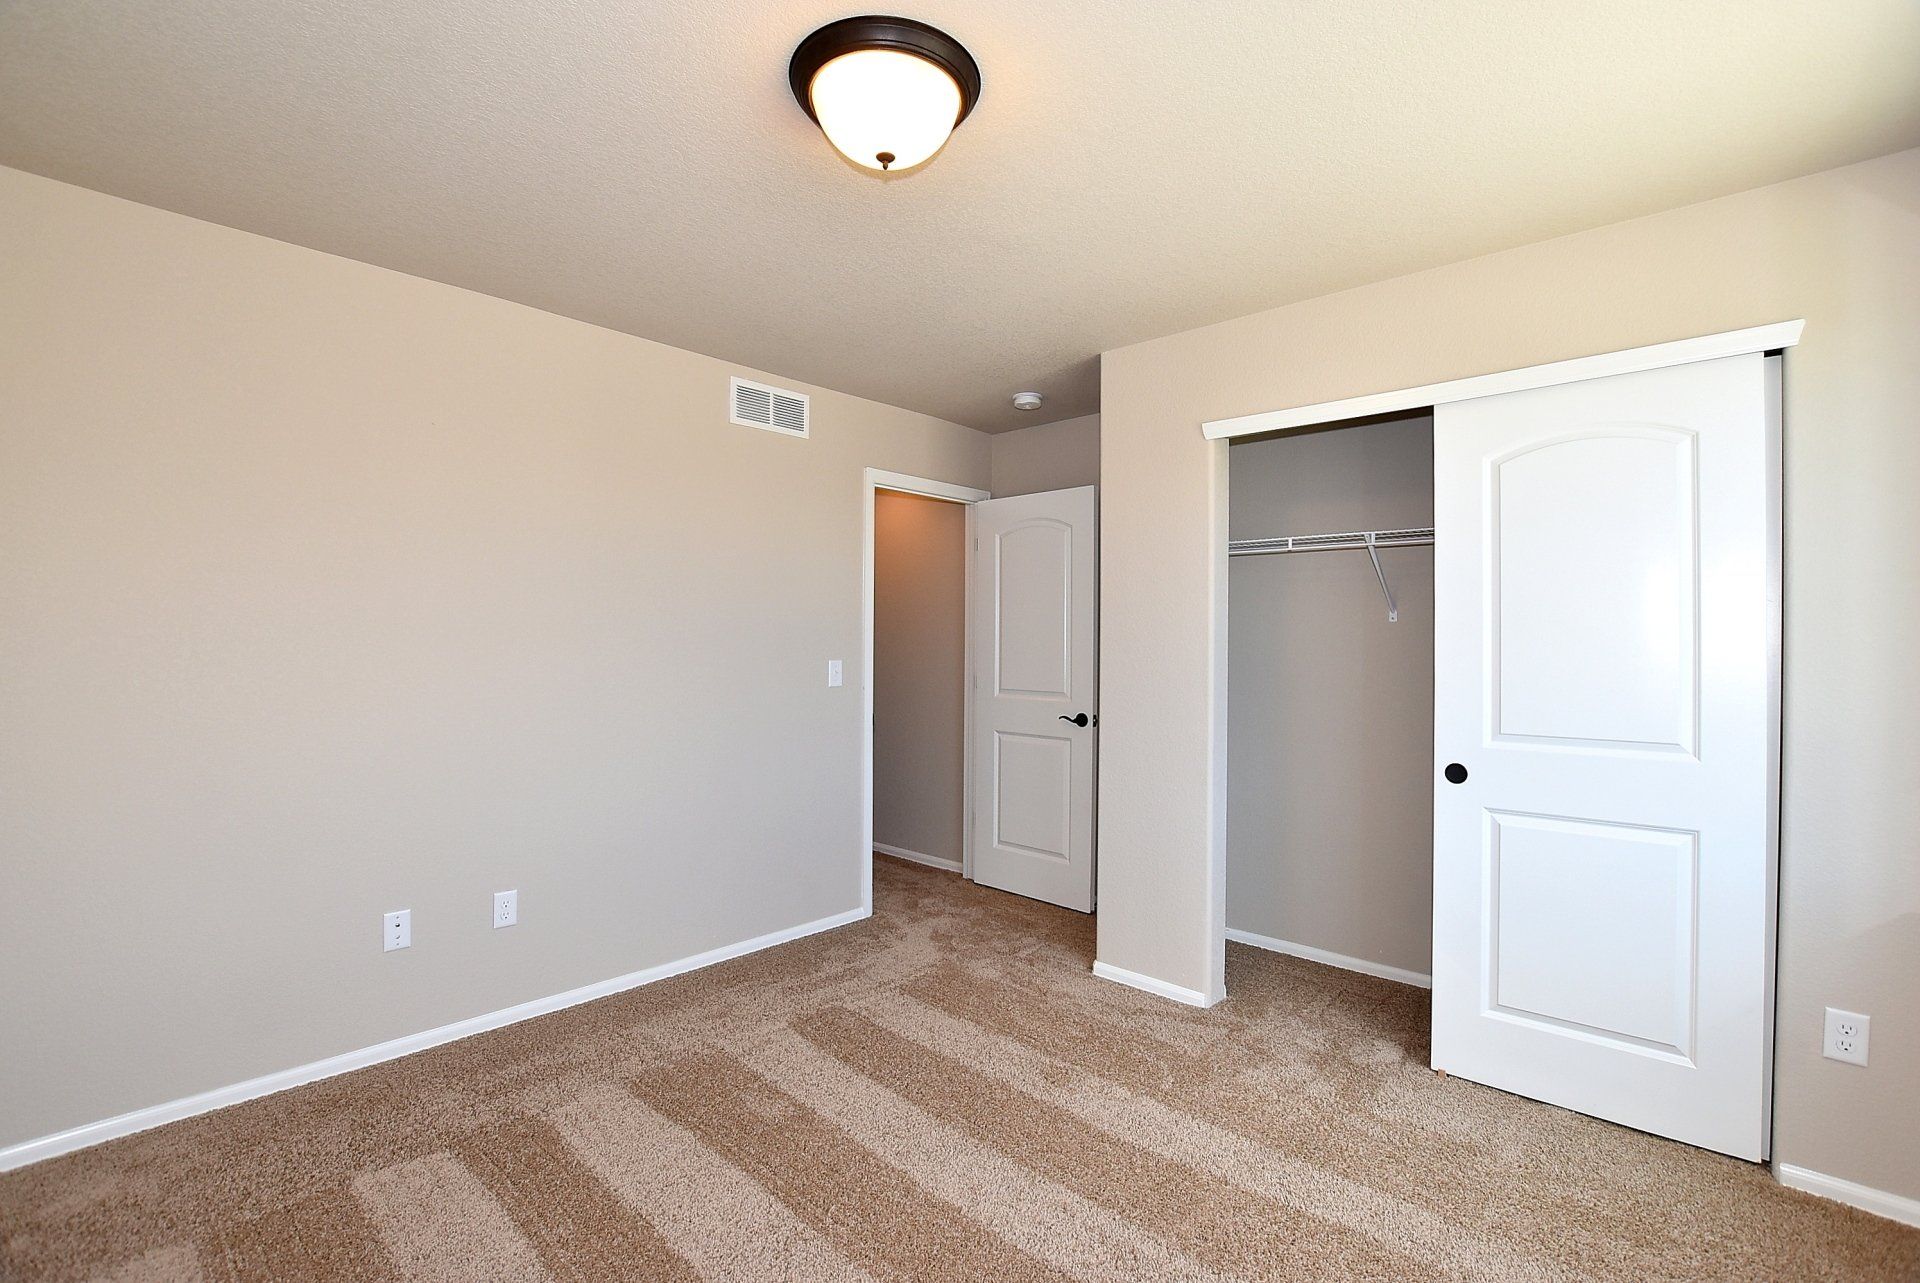 Room with a closet and doorway